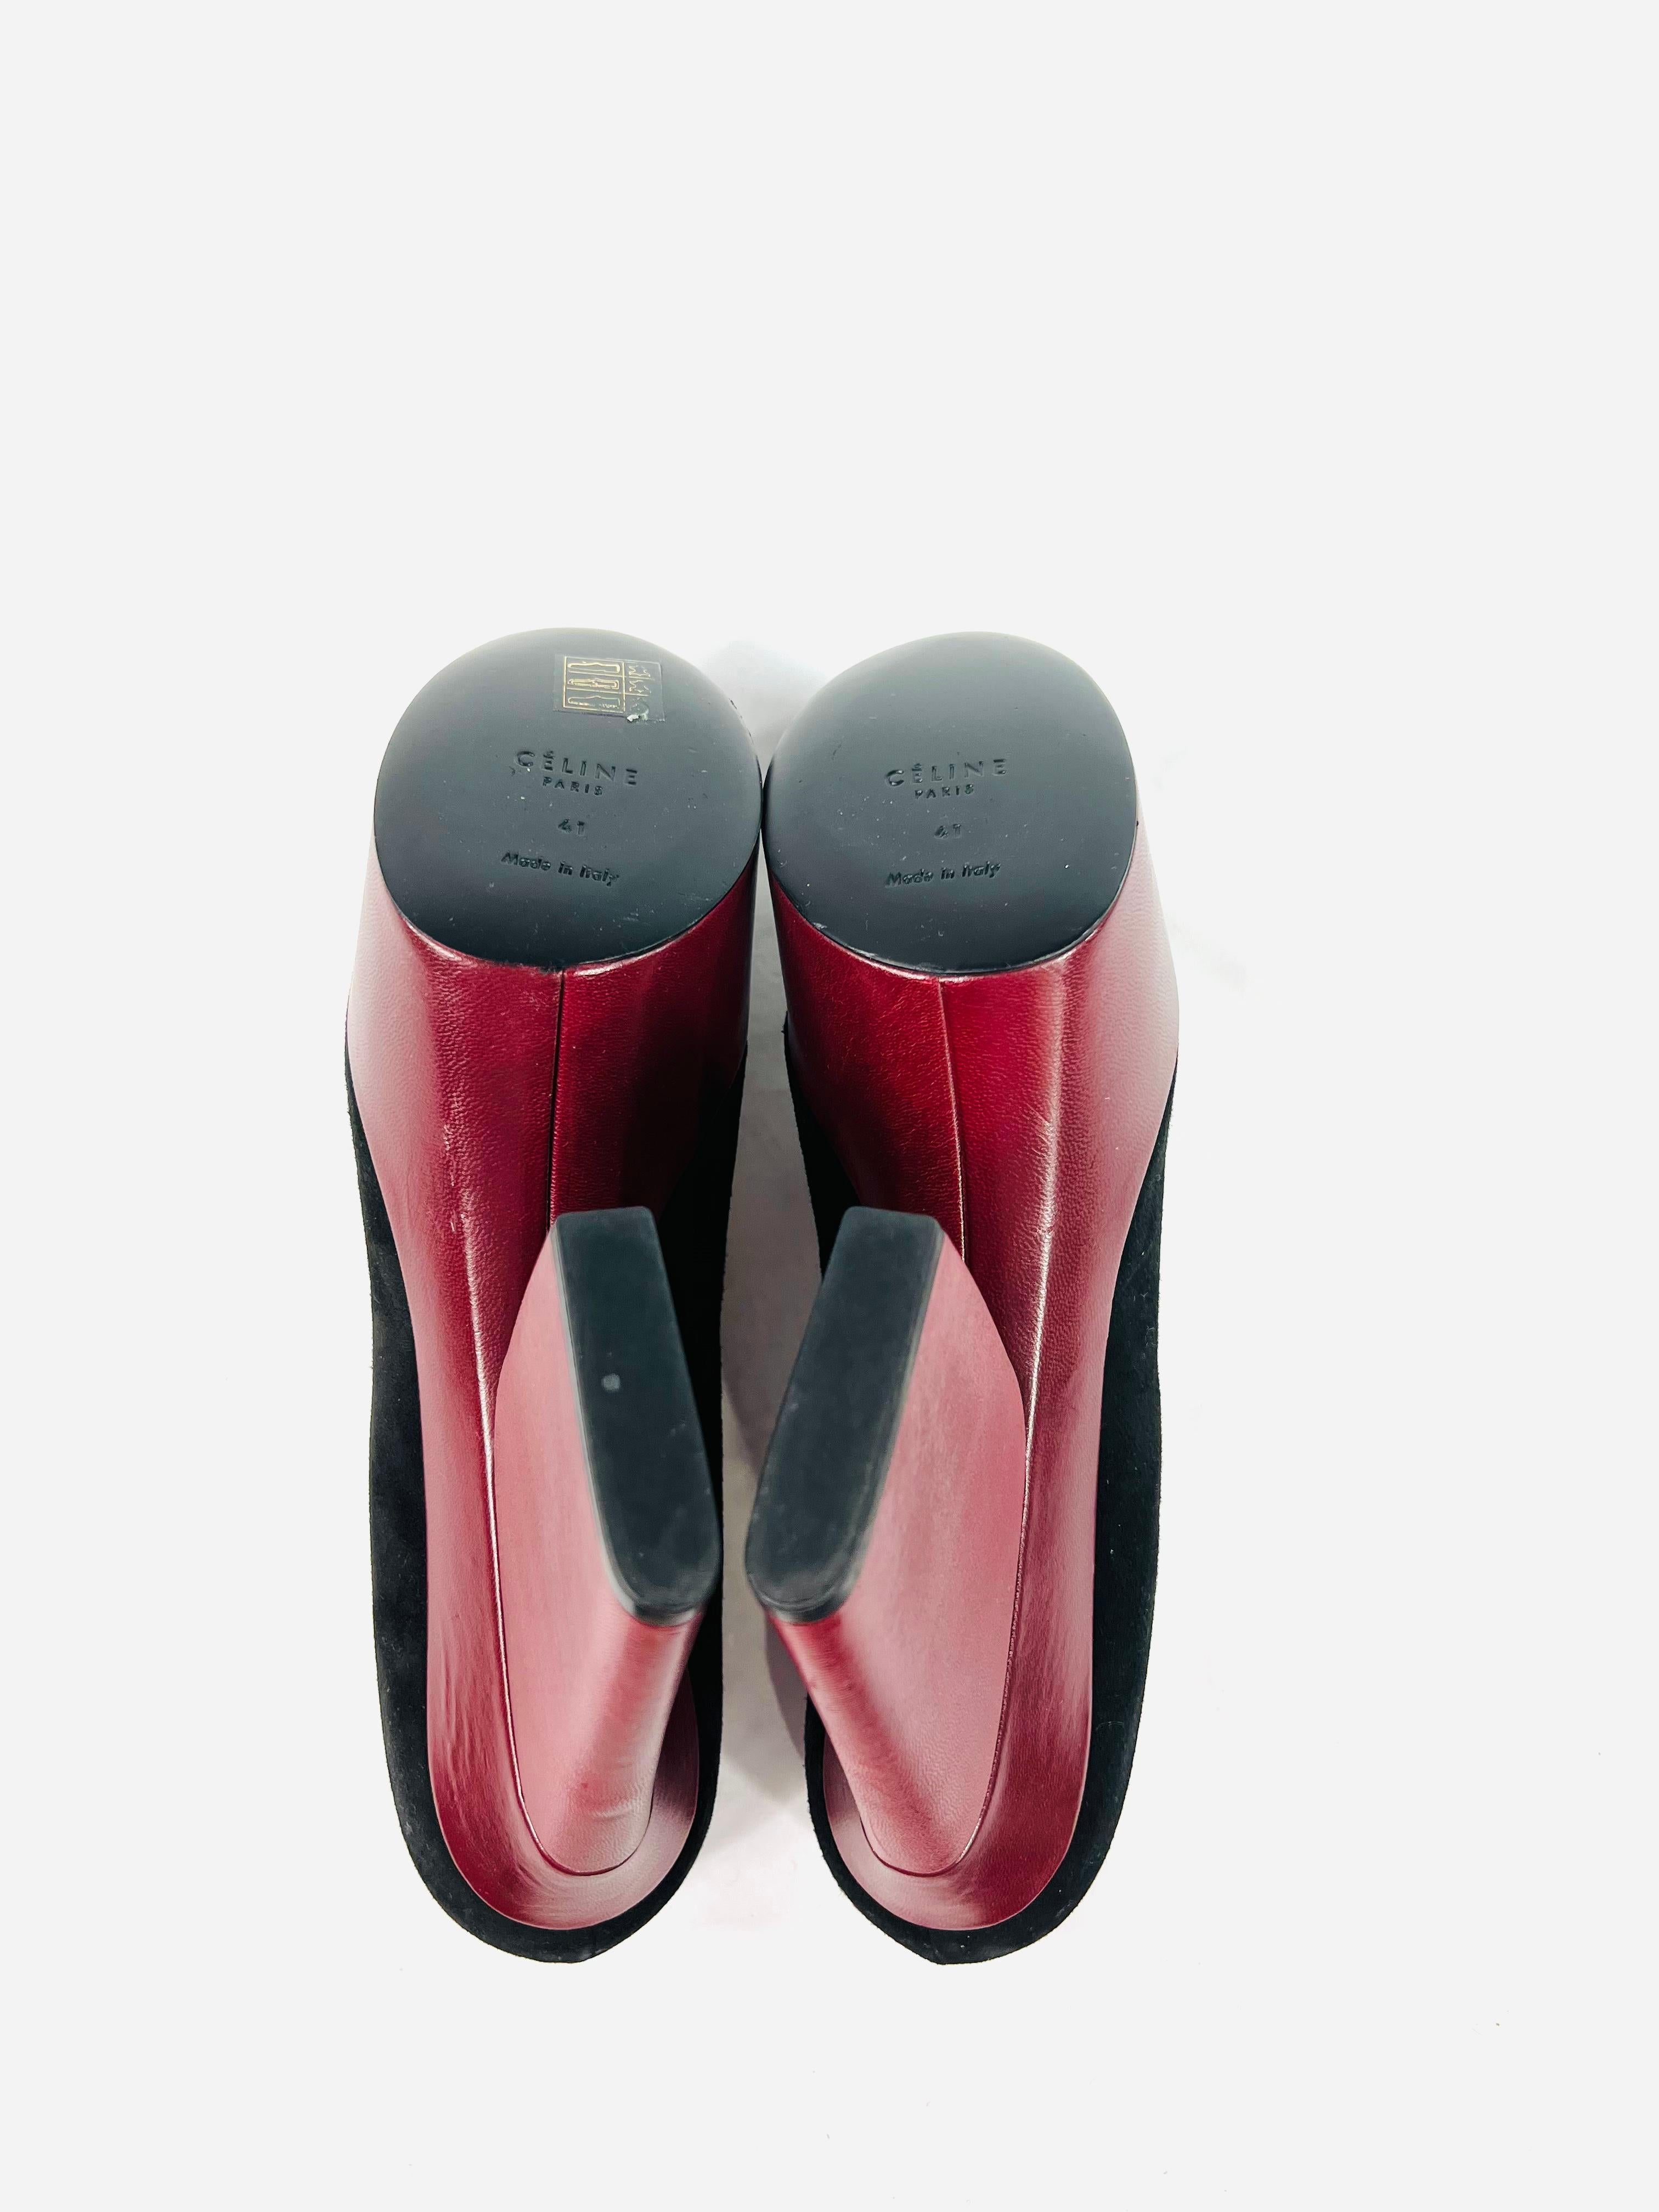 Celine Black and Burgundy High Heel Shoes, Size 41 In New Condition For Sale In Beverly Hills, CA